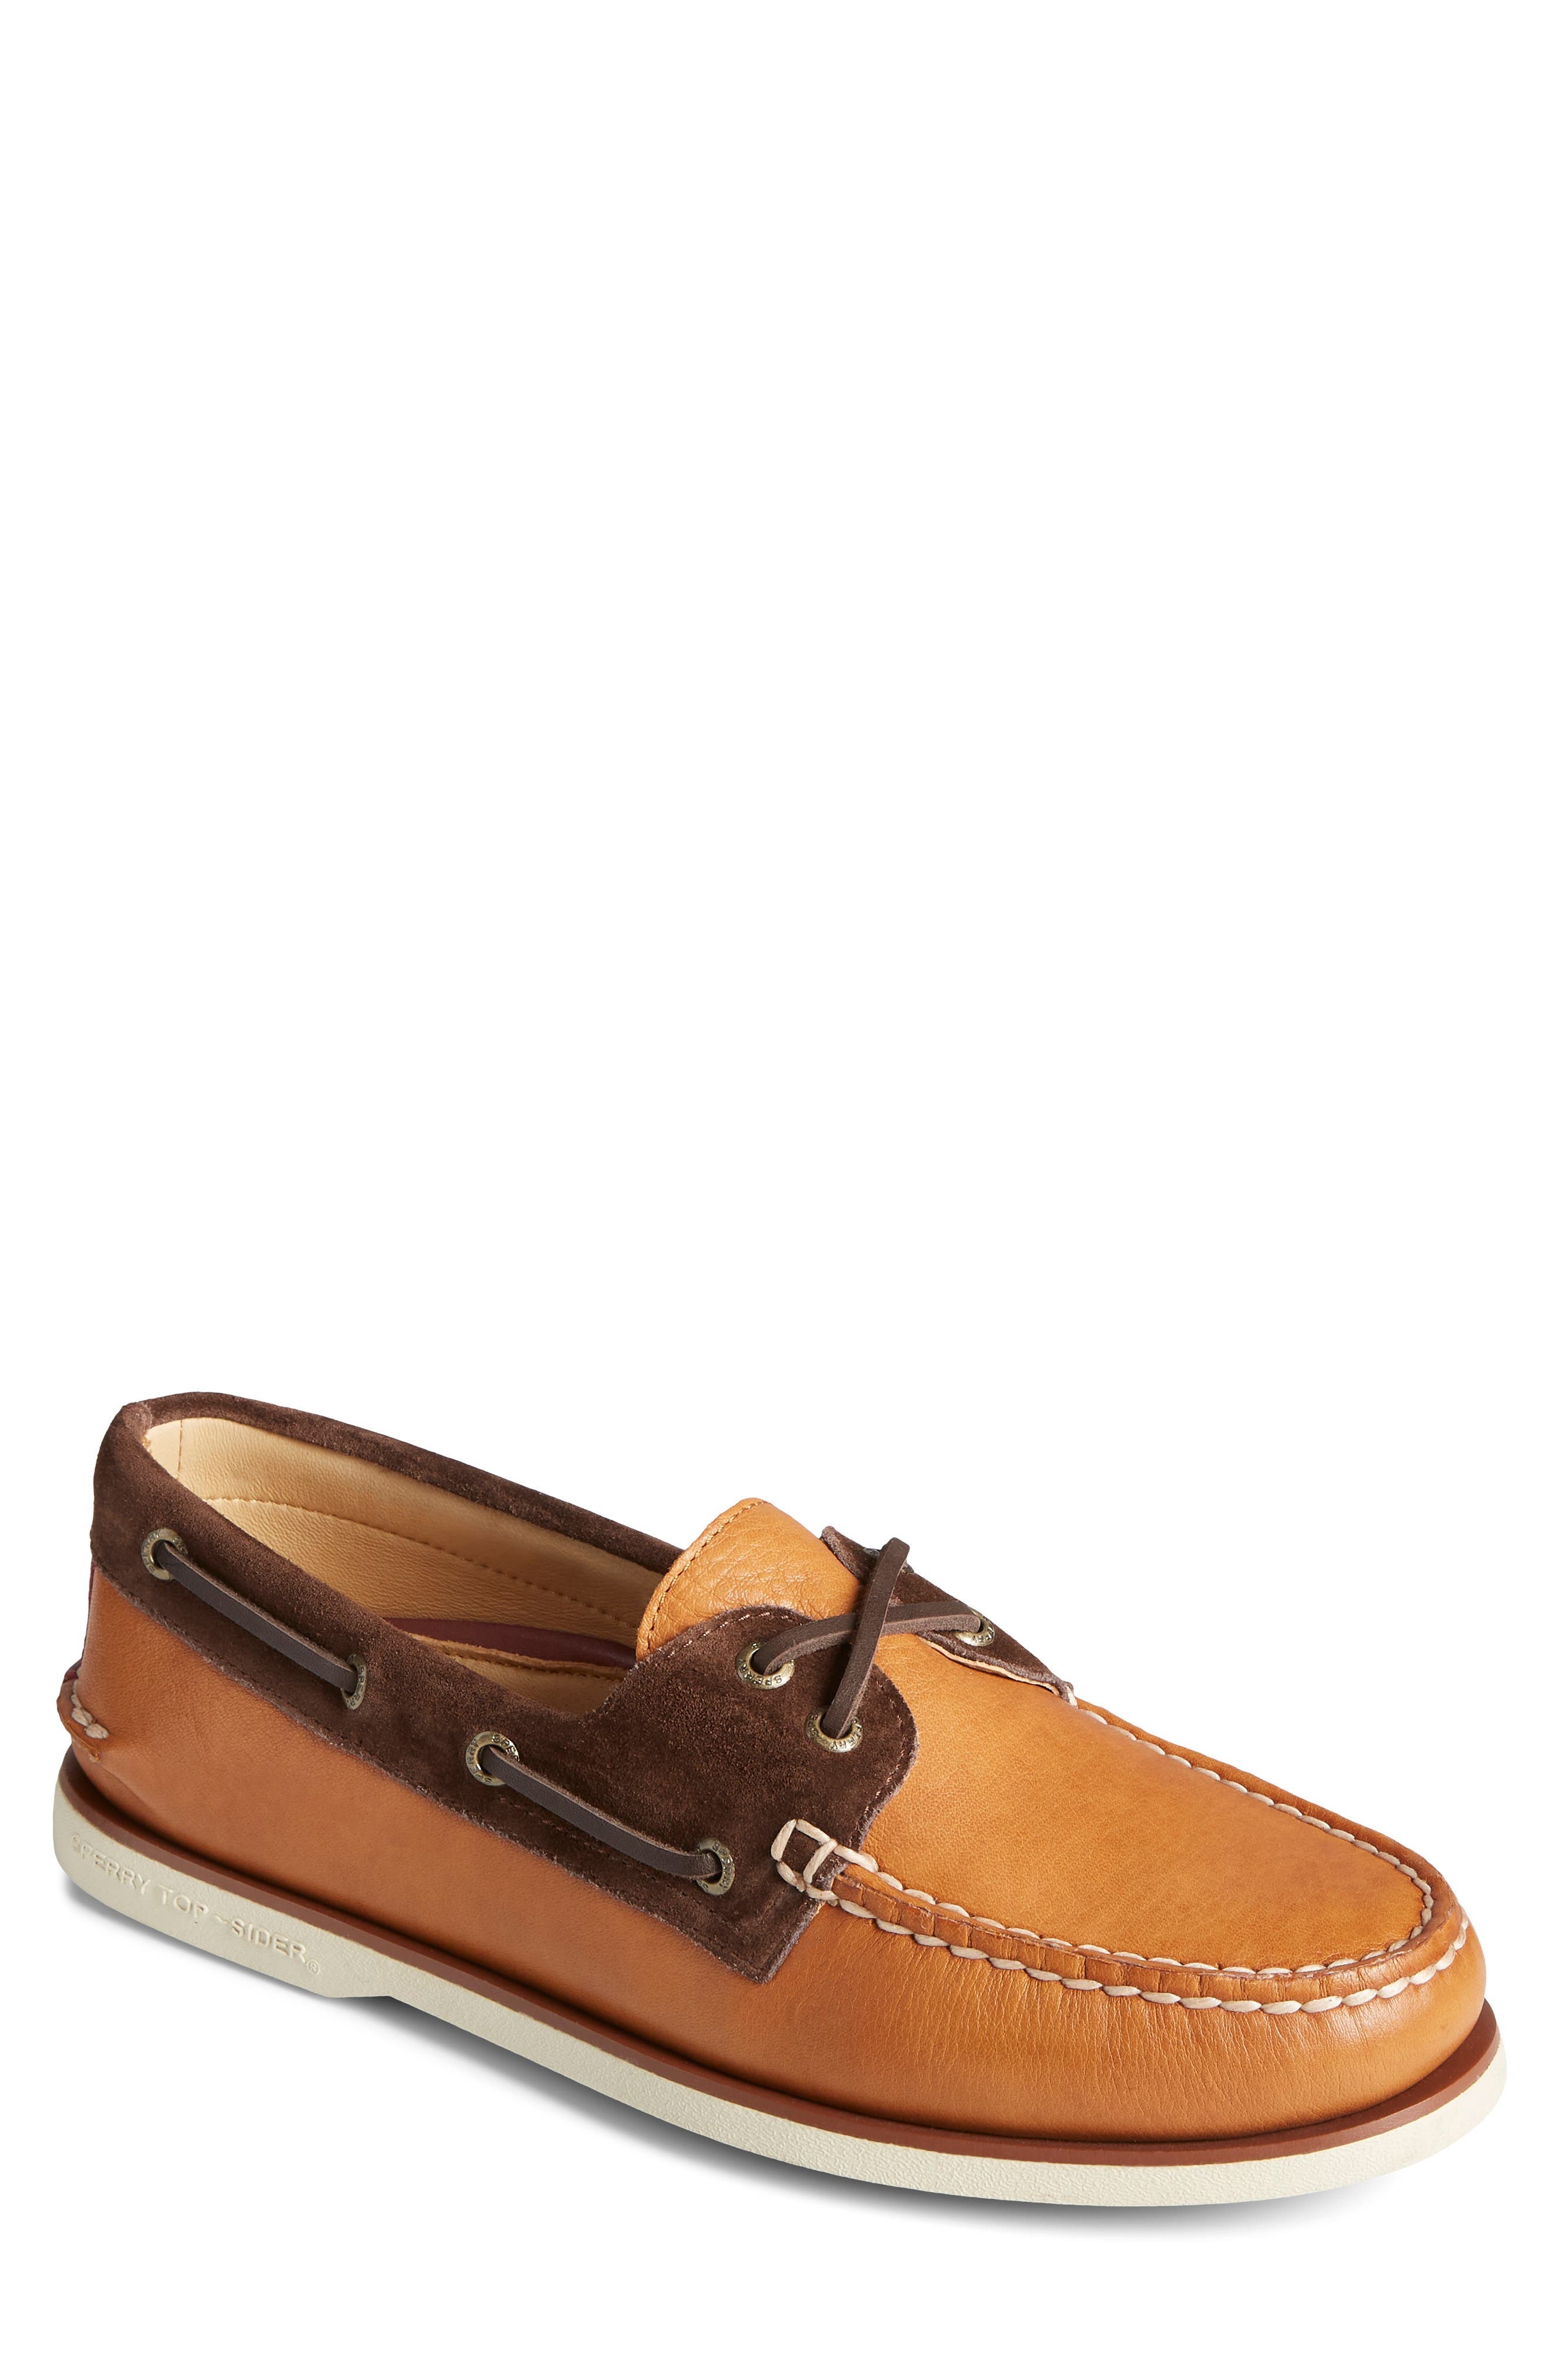 Sperry Gold Cup Authentic Original Boat Shoe, $160 | Nordstrom | Lookastic